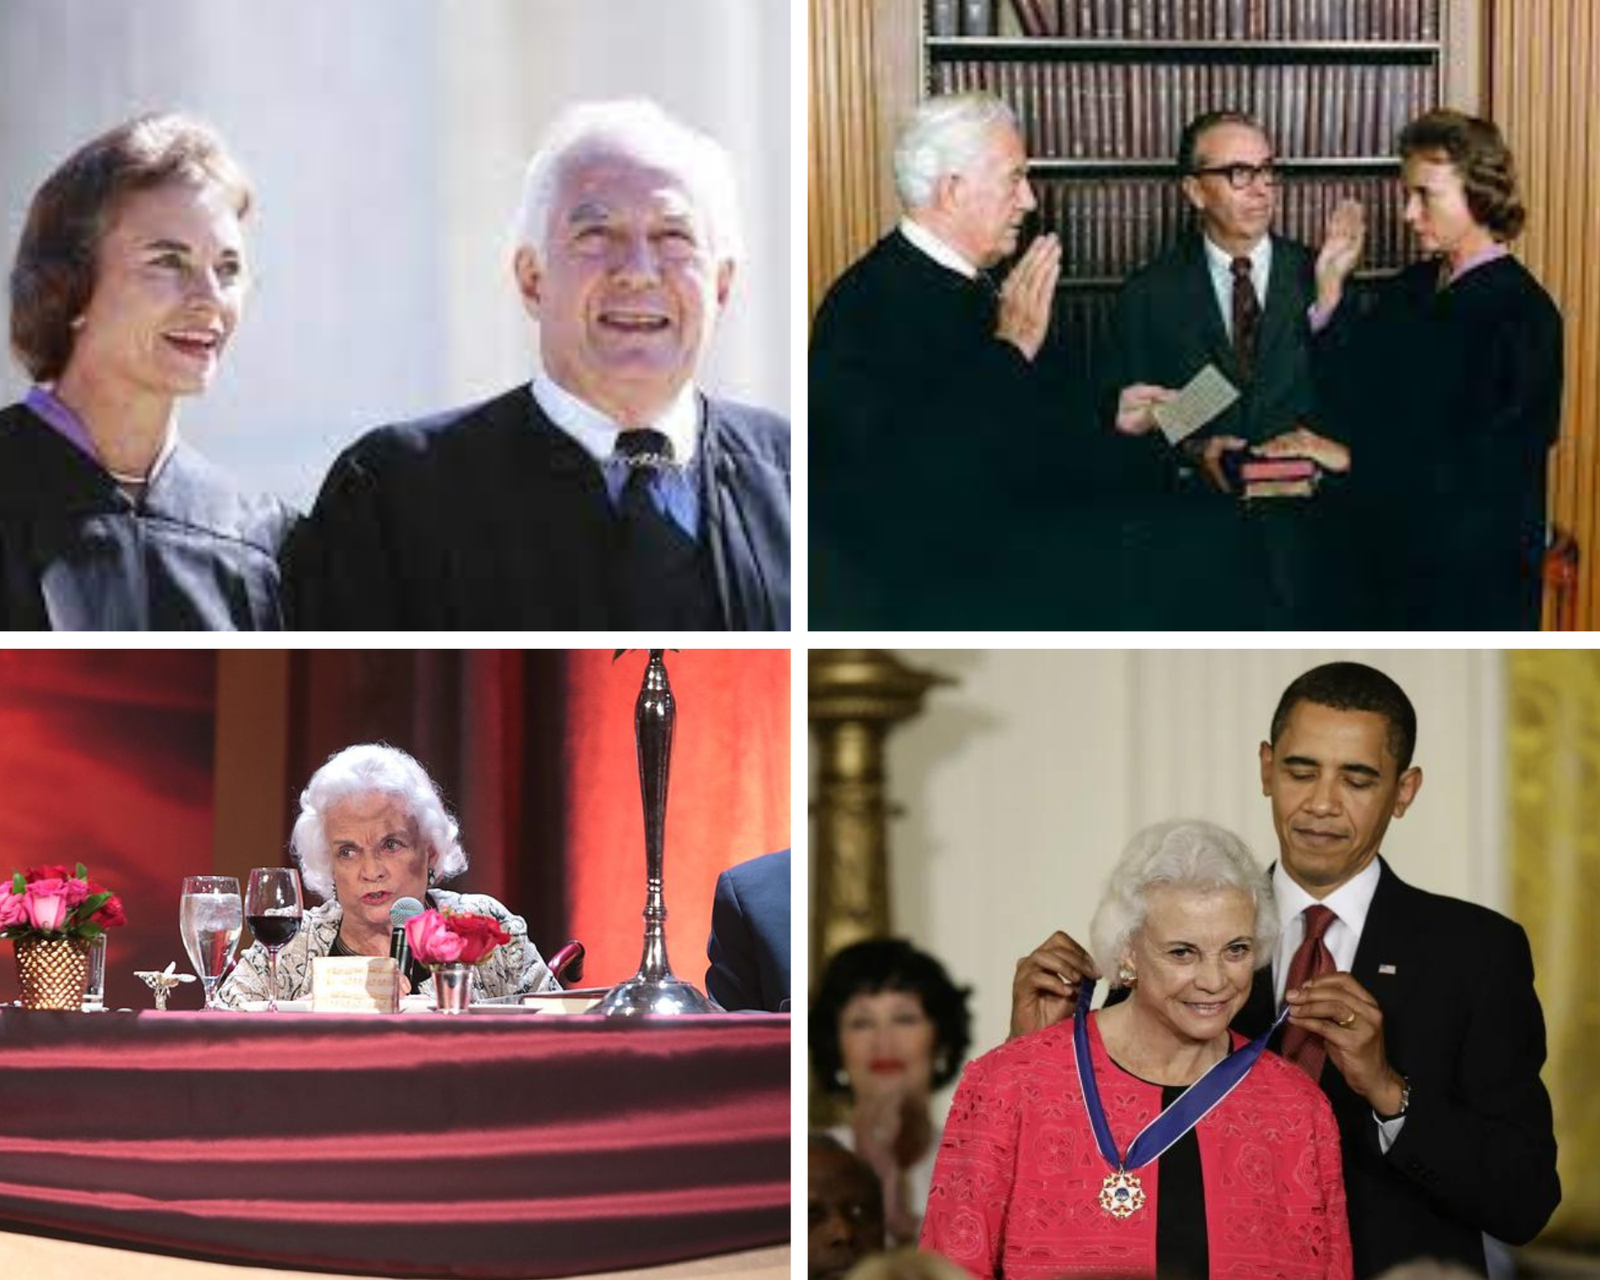 Sandra Day O’Connor Career and achivements